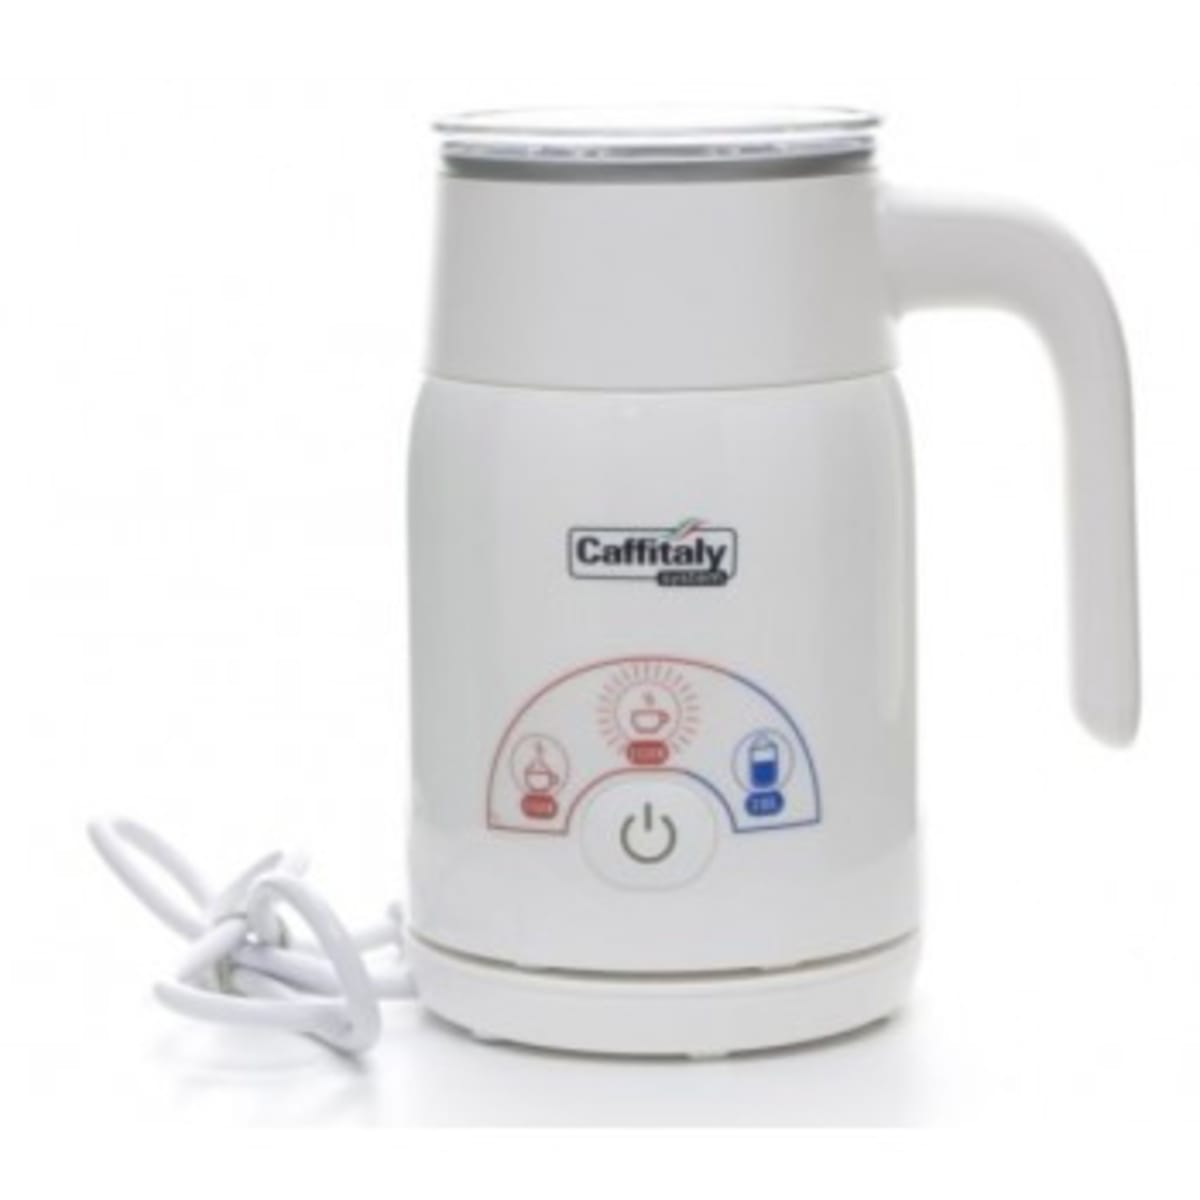 Caffitaly Milk Frother Machine - 400ml